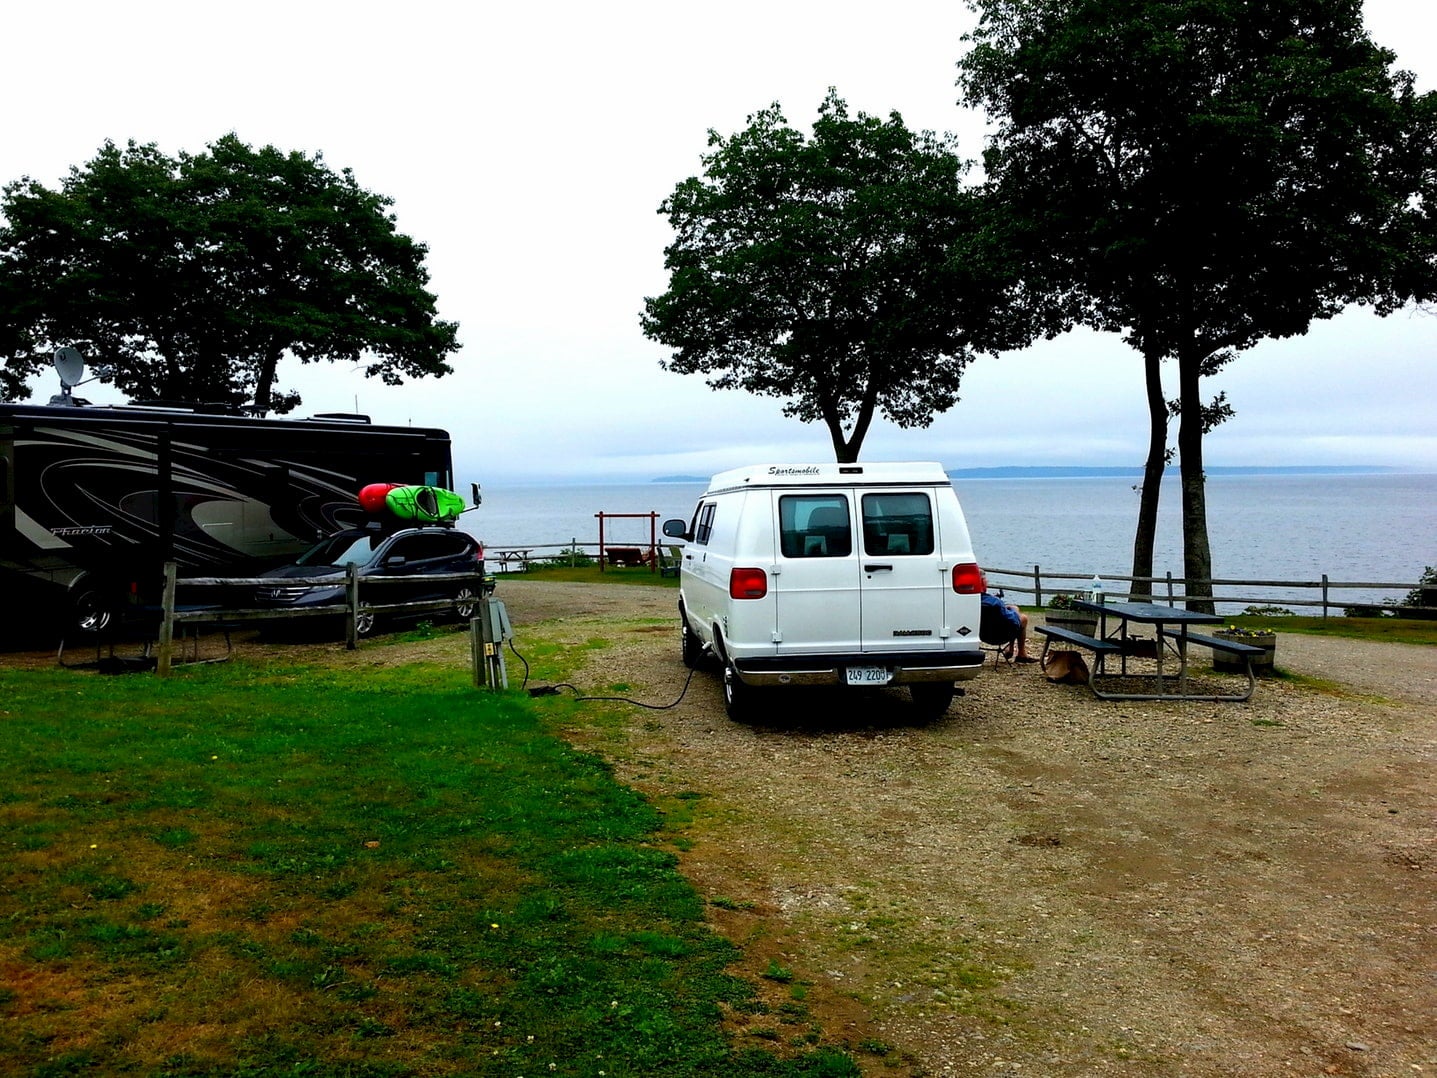 Van parked in campsite beside picnic table, trees, and the ocean.